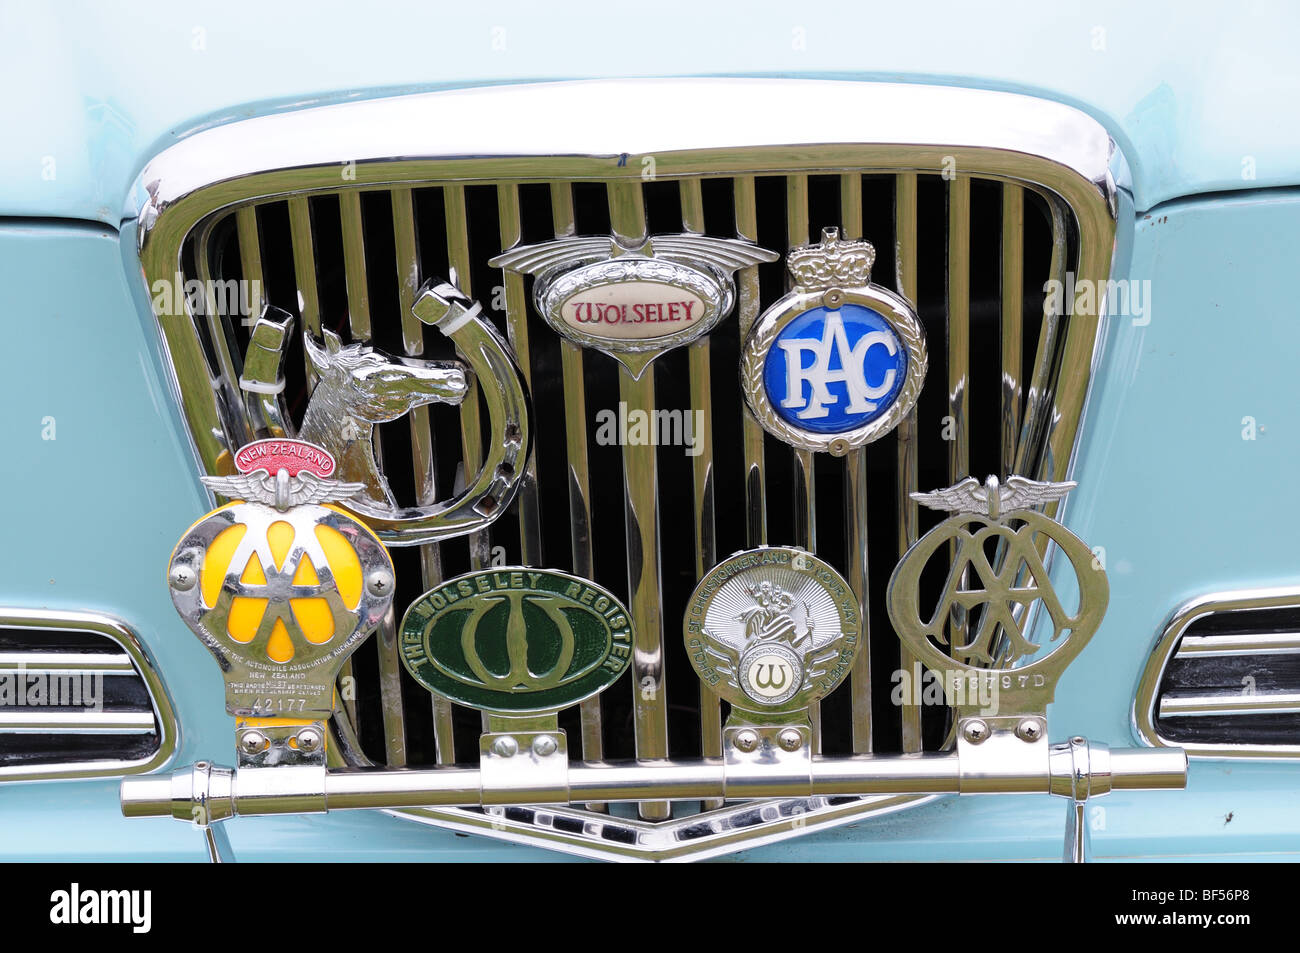 Wolseley owners club grille badge 